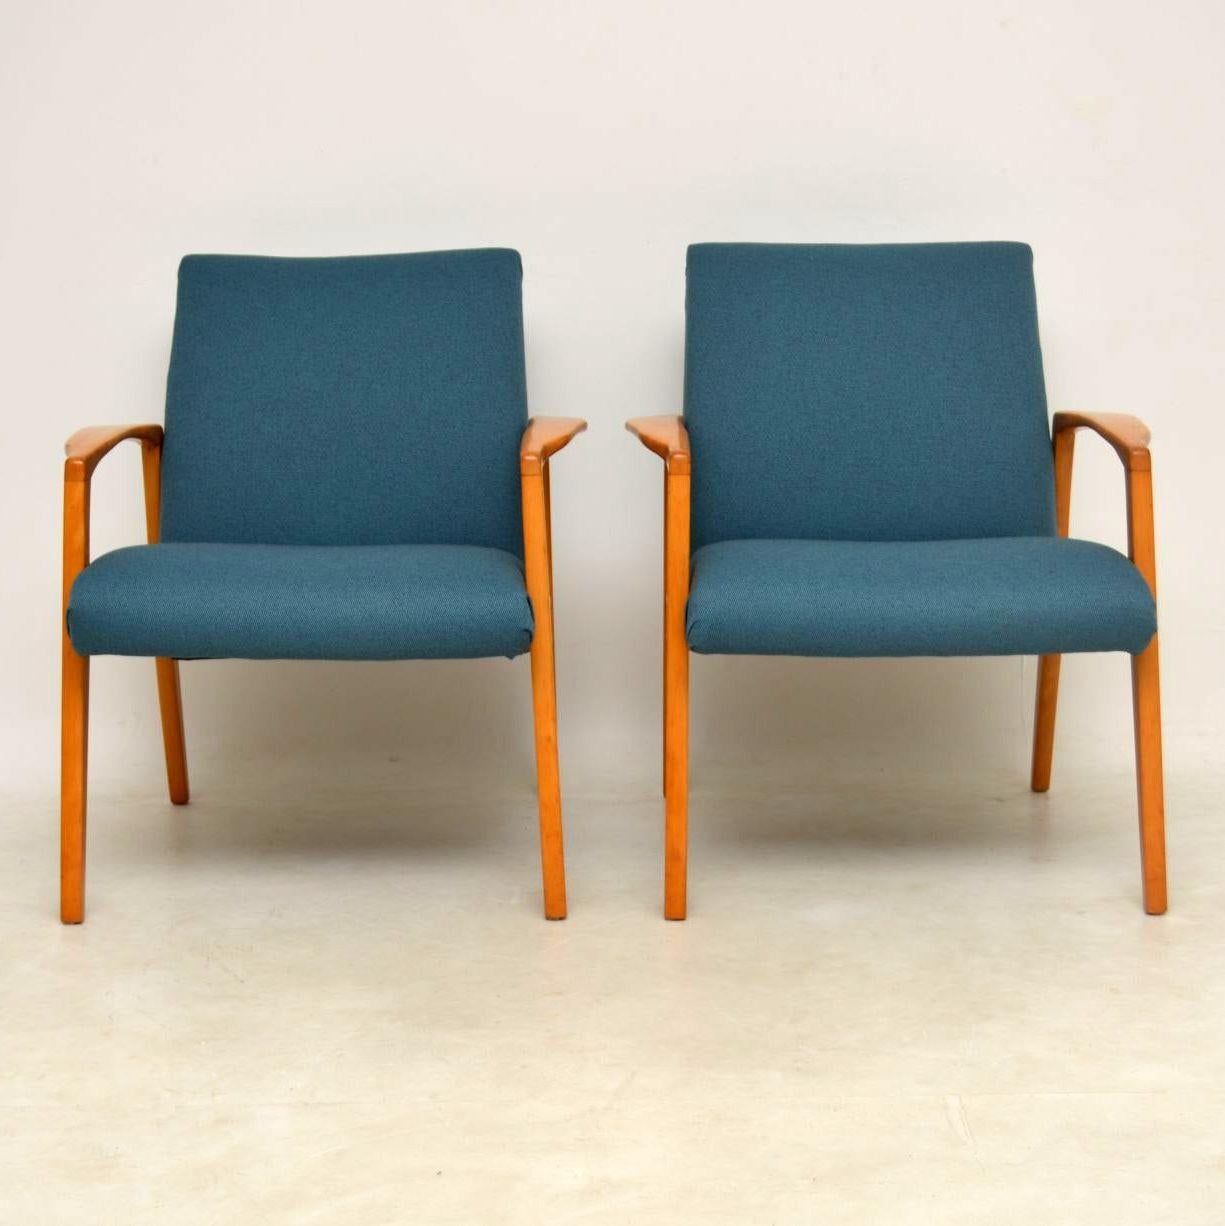 A beautiful pair of vintage armchairs, these were recently imported from Sweden and they date from the 1960s. The frames are a solid light wood, possibly cherry or beech, and the condition is excellent for their age. There is just some minor wear